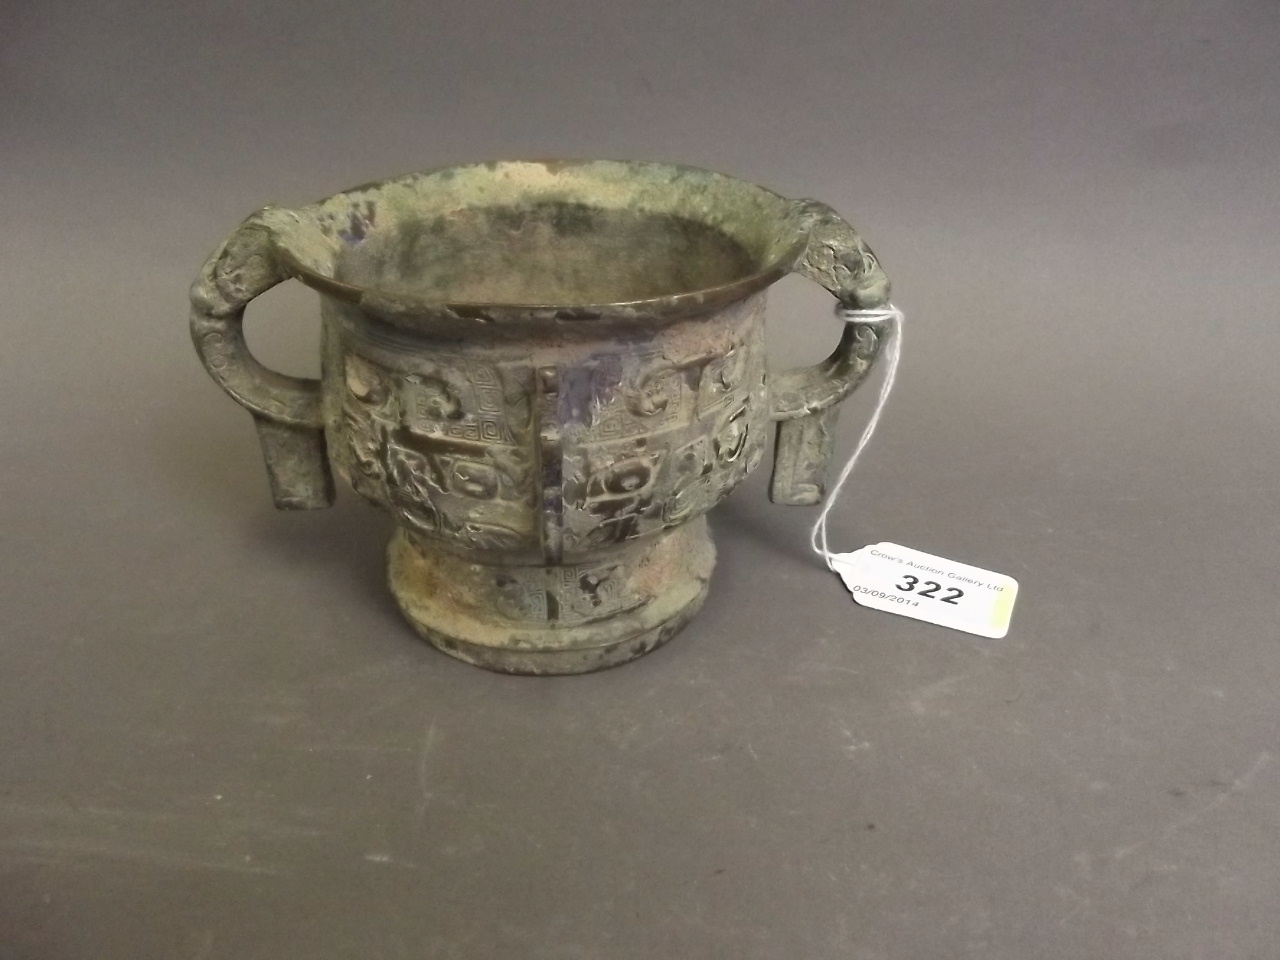 A Chinese archaic style bronze twin handled vessel with verdigris patination, 3¾" high, 6" diameter